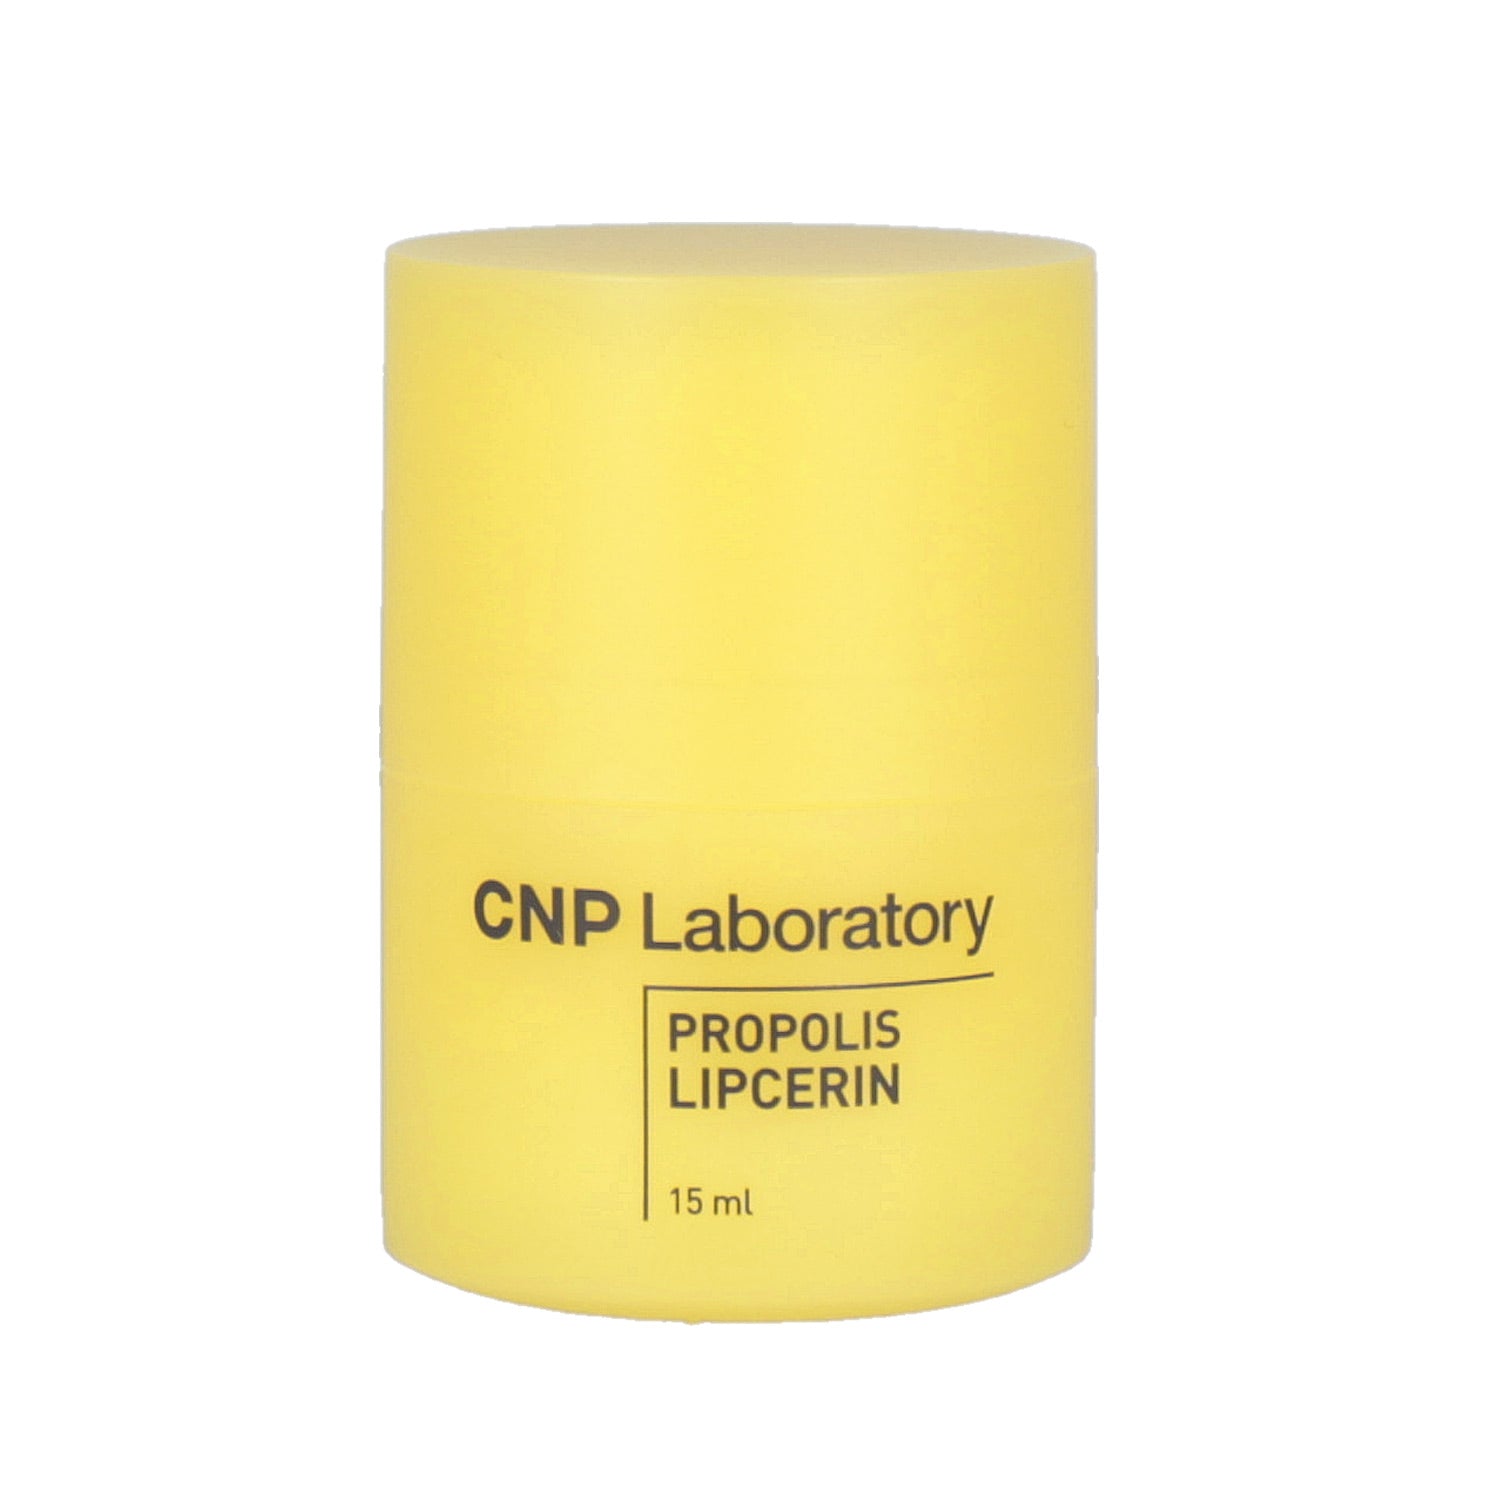 CNP Laboratory Propolis Lipcerin 15ml: a lip care solution containing propolis extract to hydrate and revitalize dry lips effectively.